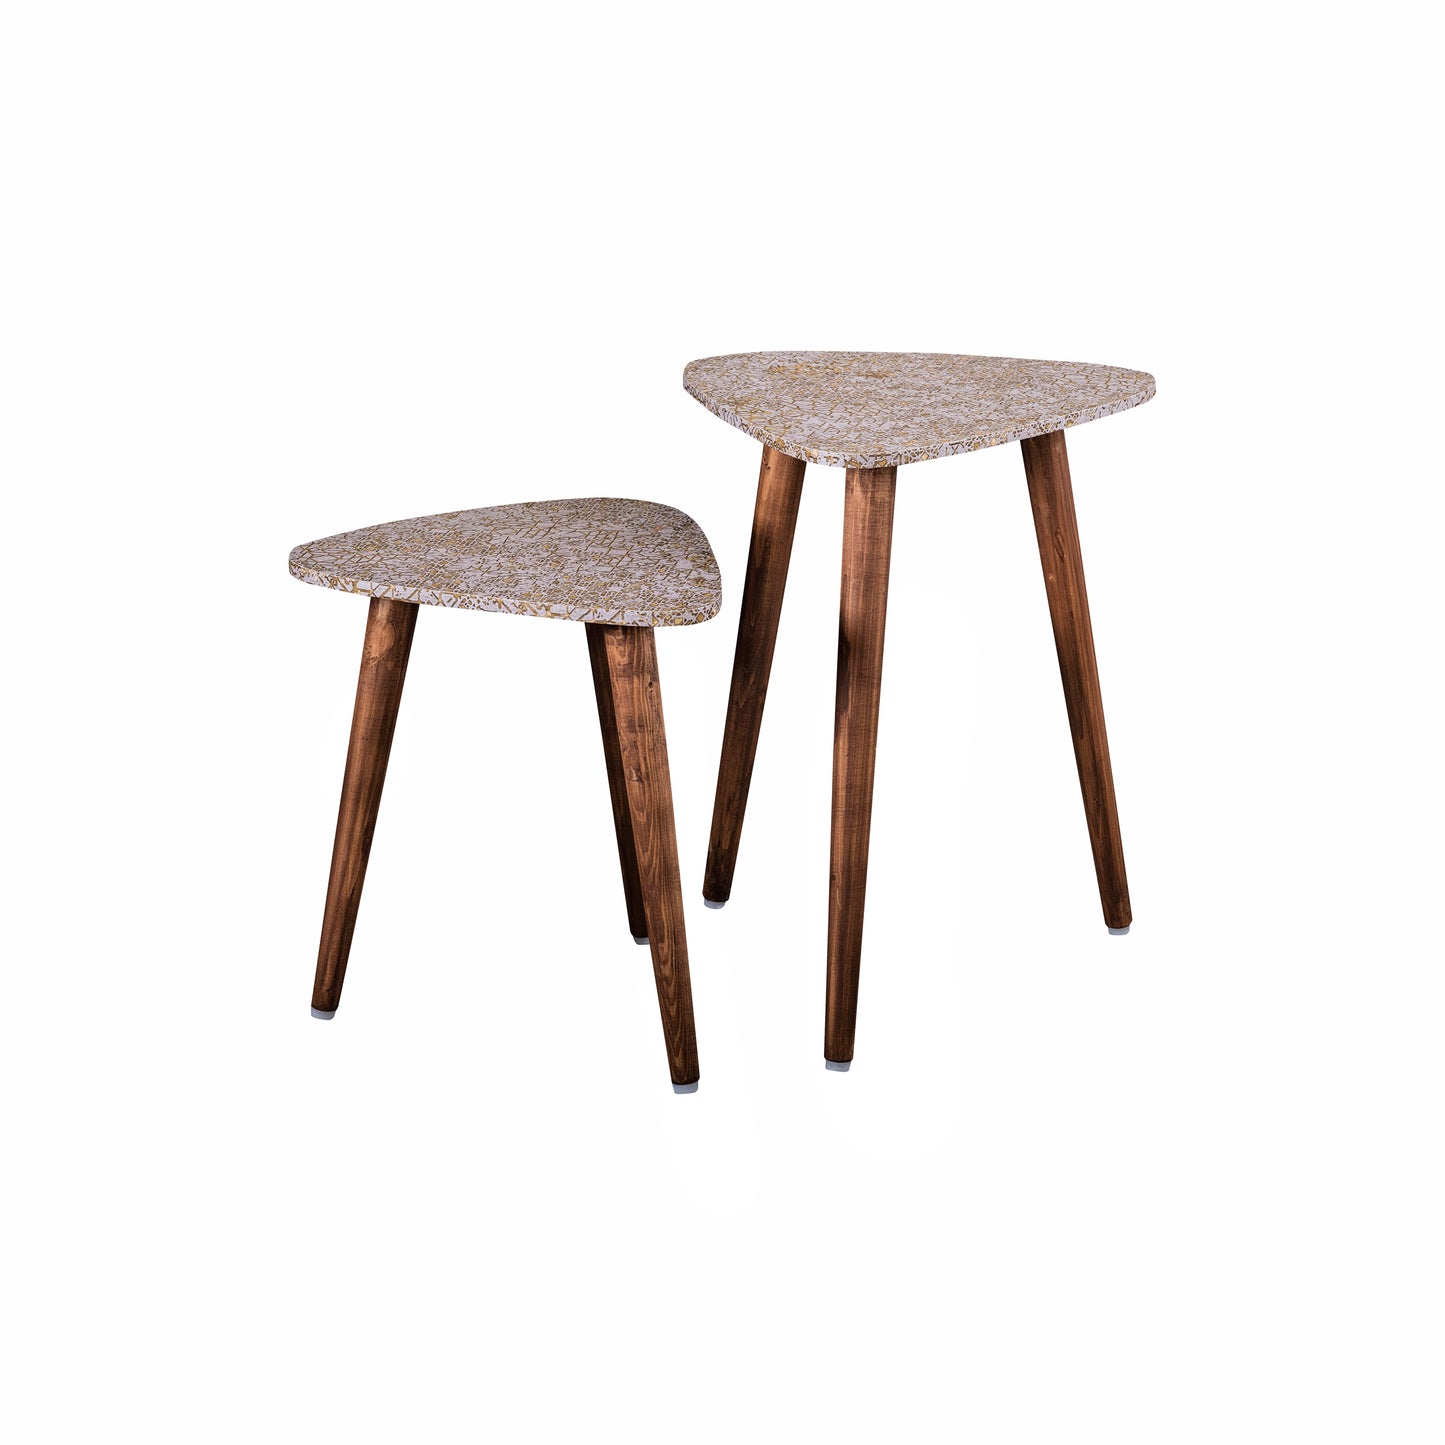 A Tiny Mistake Honeycomb Trinity Nesting Tables (Set of Two)